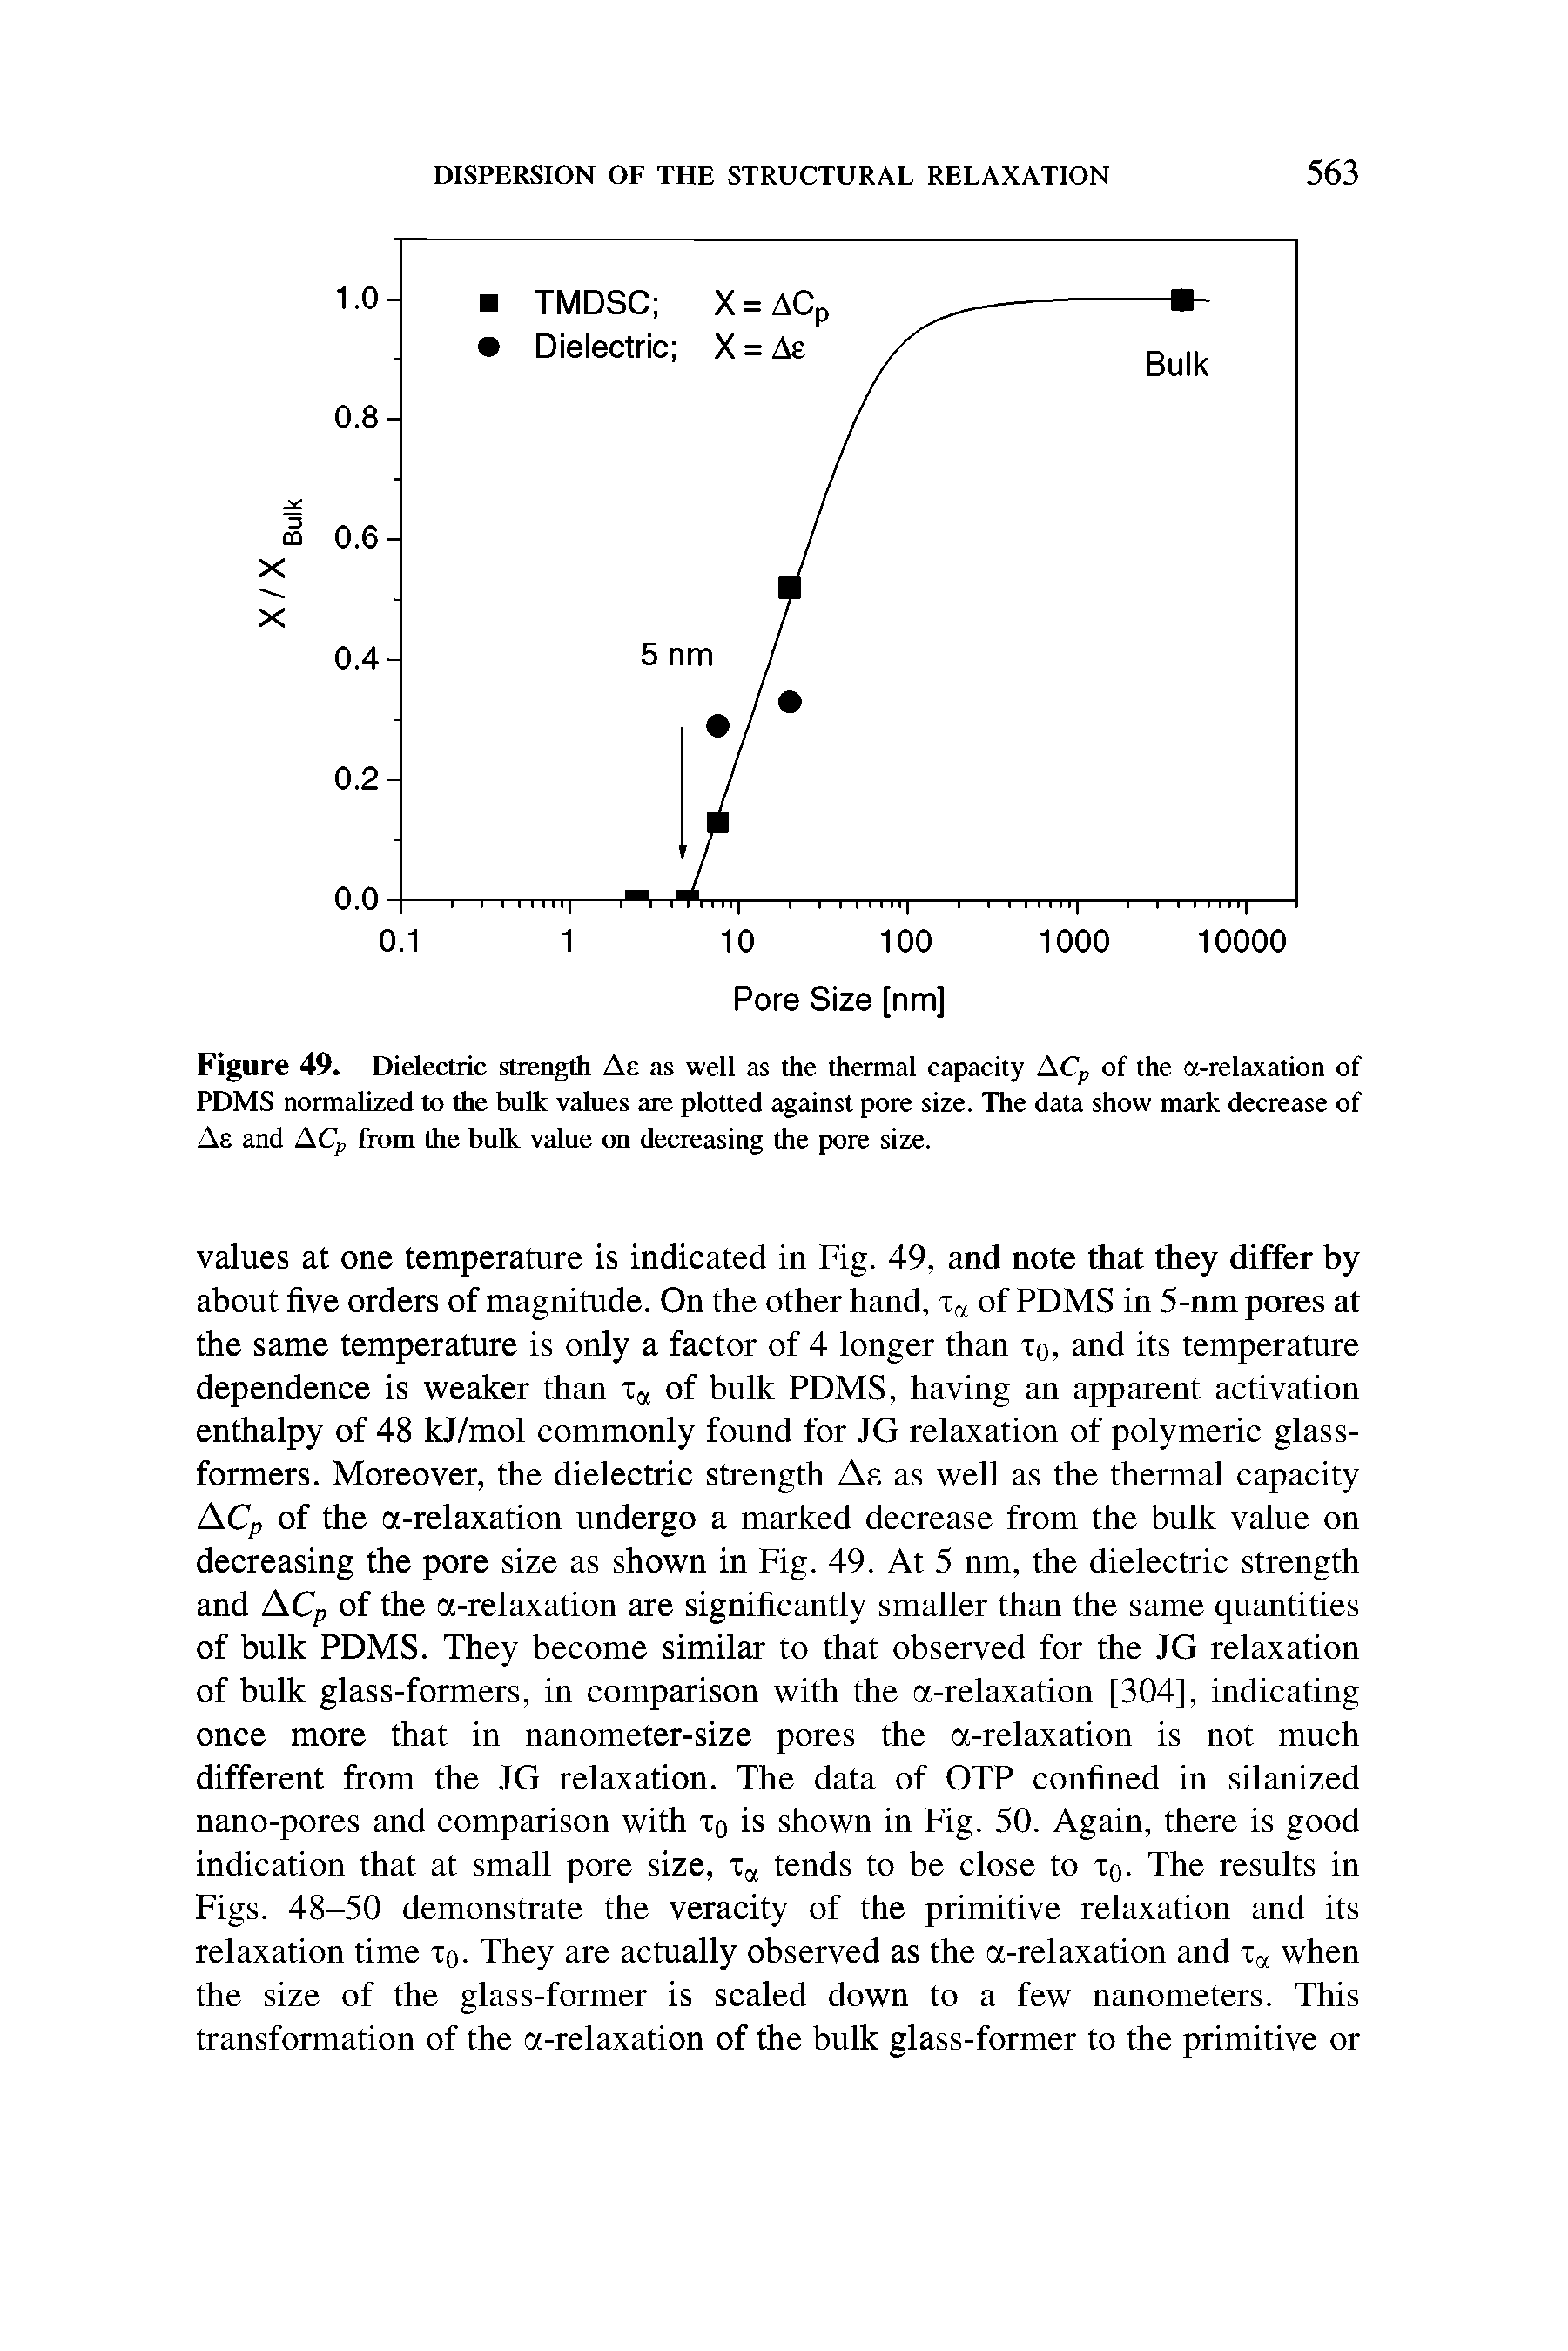 Figure 49. Dielectric strength As as well as the thermal capacity ACp of the a-relaxation of PDMS normalized to the bulk values are plotted against pore size. The data show mark decrease of Ae and A(. from the bulk value on decreasing the pore size.